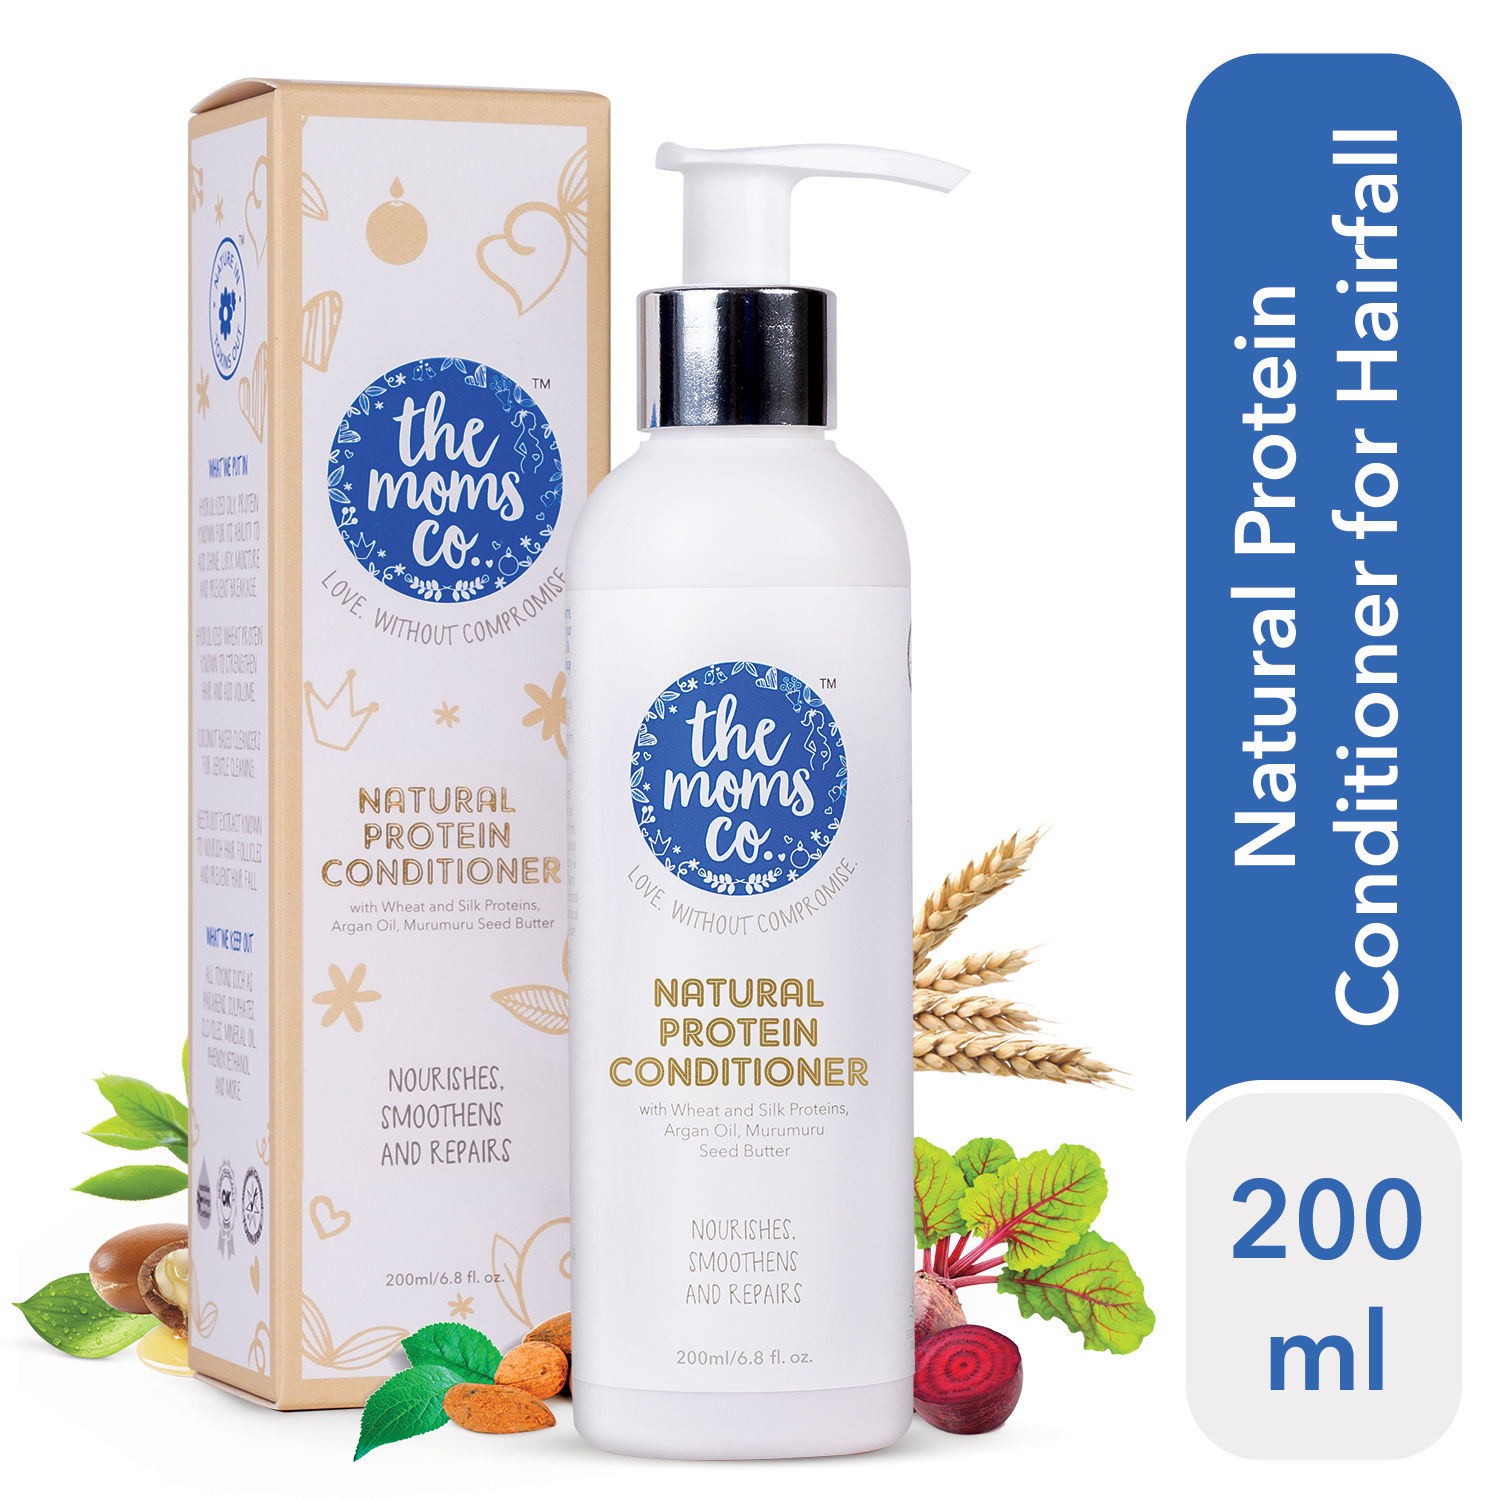 The Moms Co. Natural Protein Conditioner